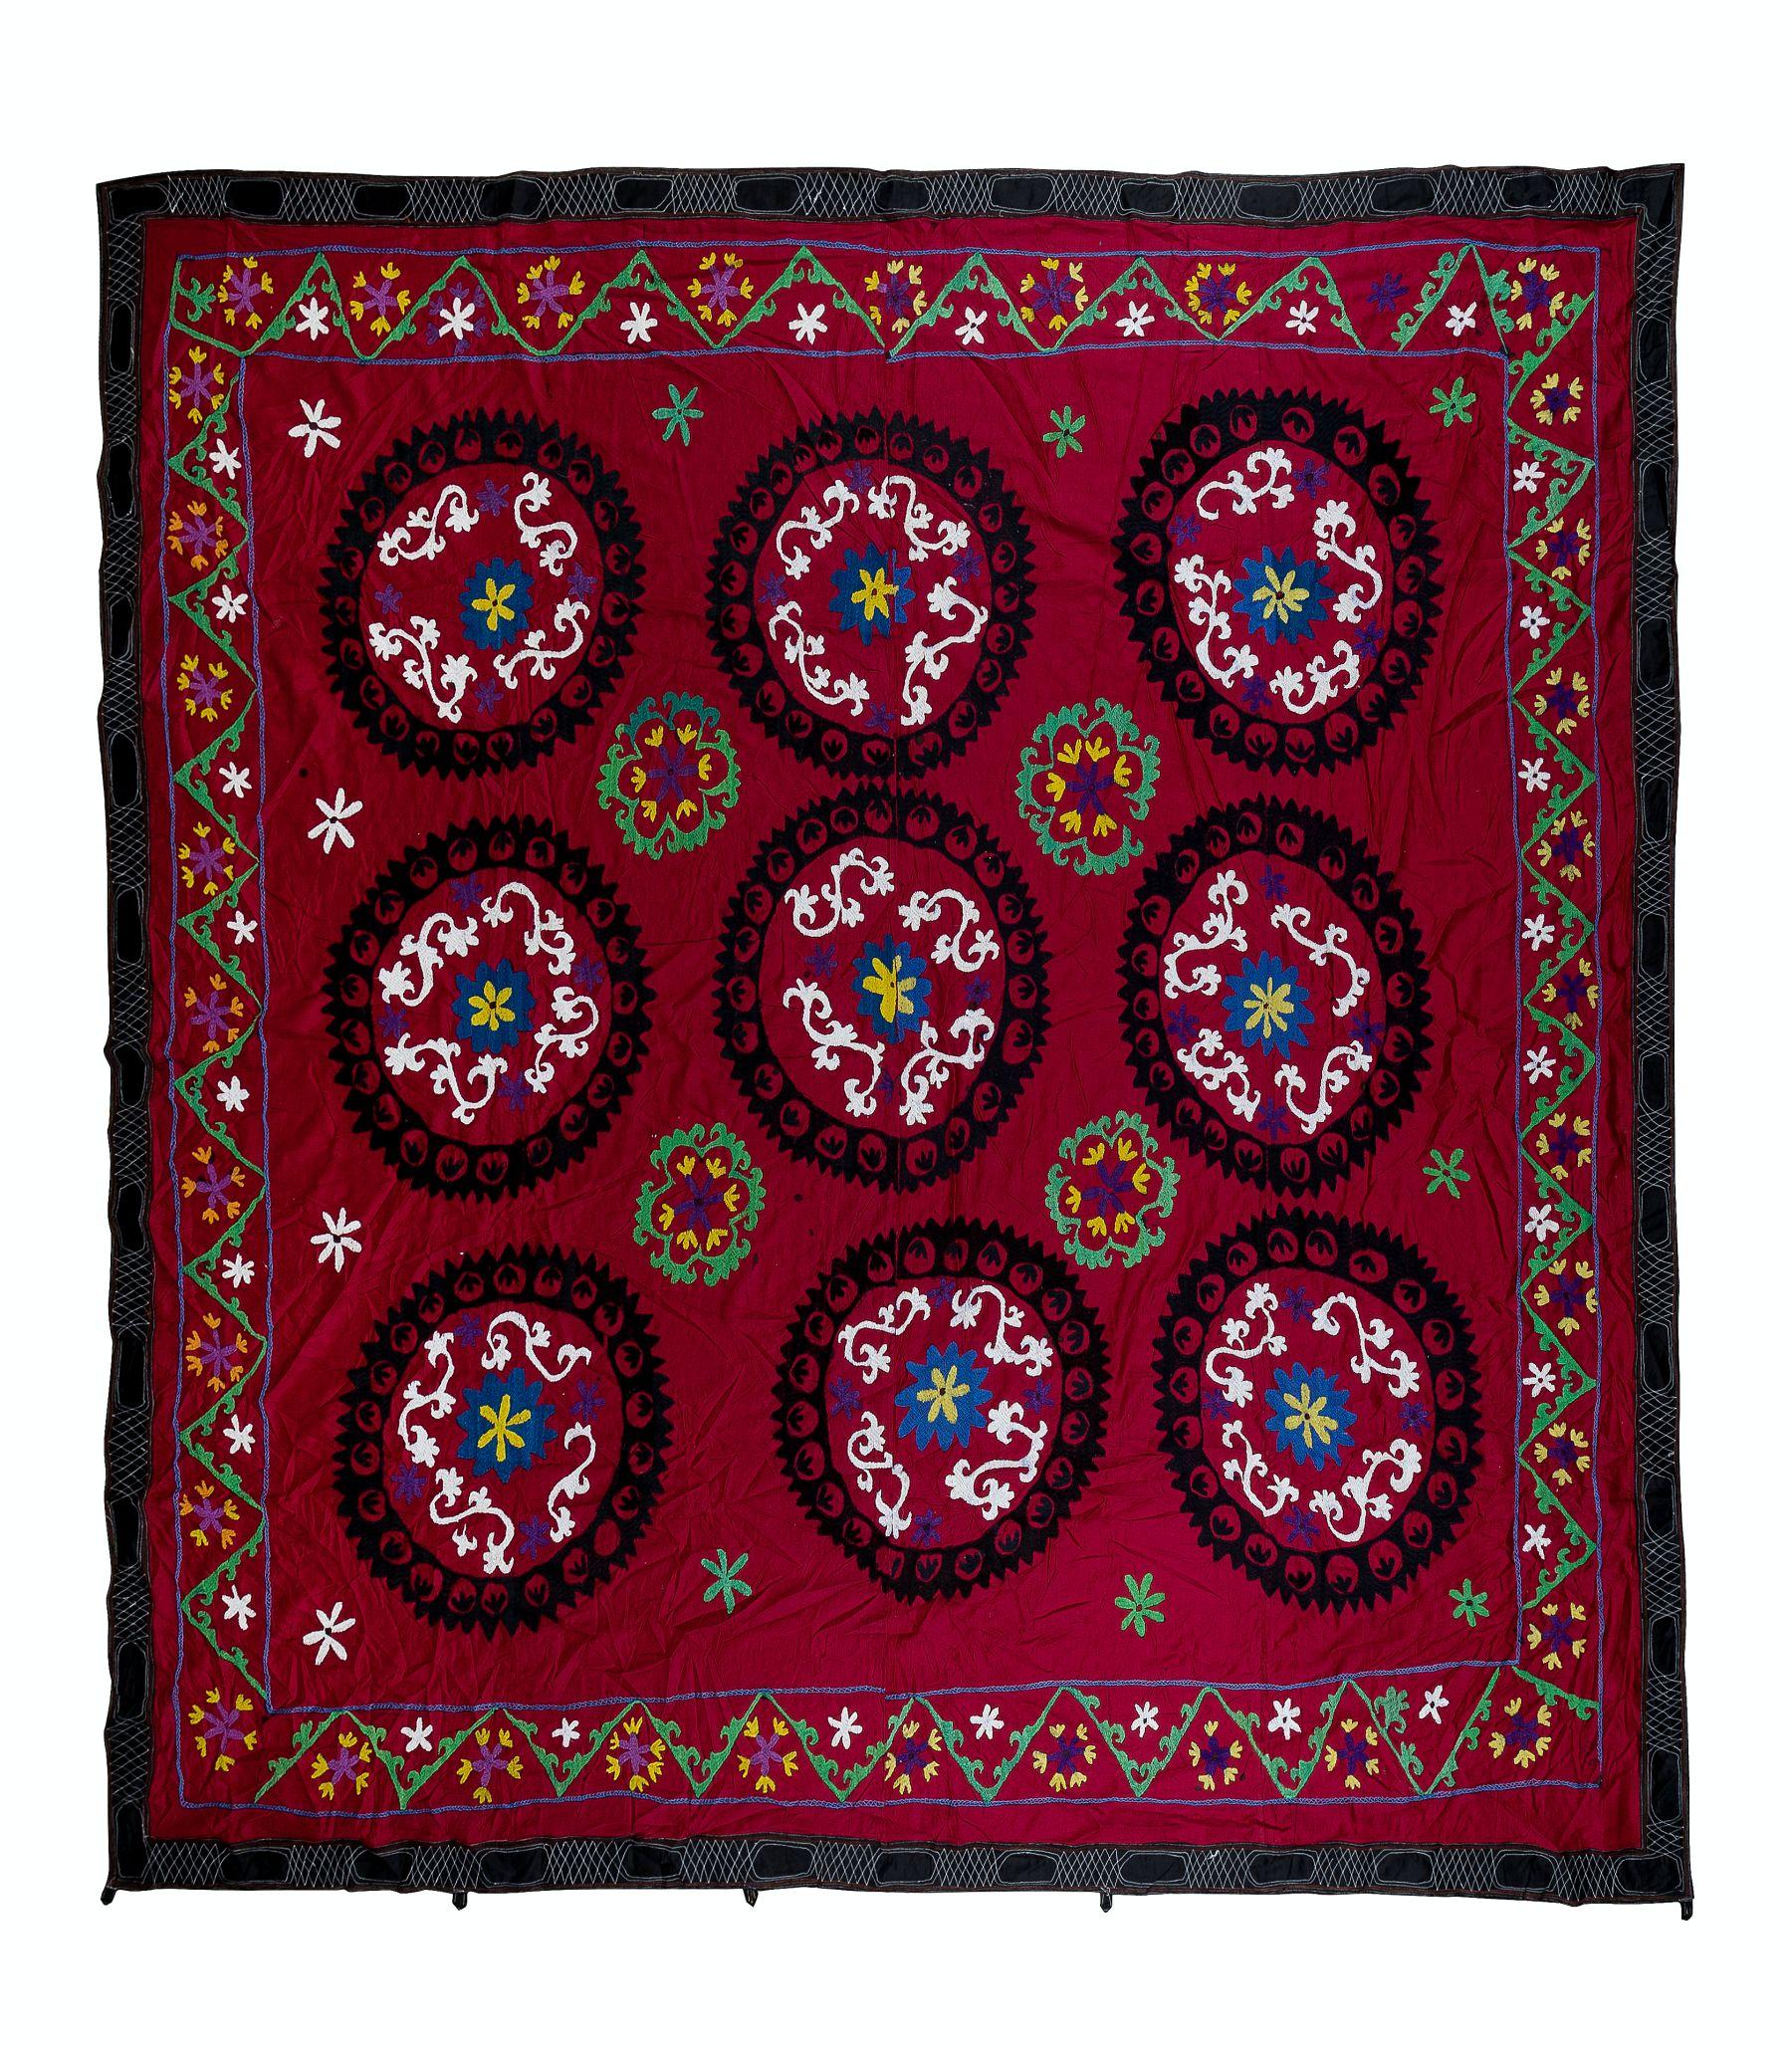 8.3x8.3 Ft Vintage Silk Embroidery Bedspread, Central Asian Suzani Bed Cover For Sale